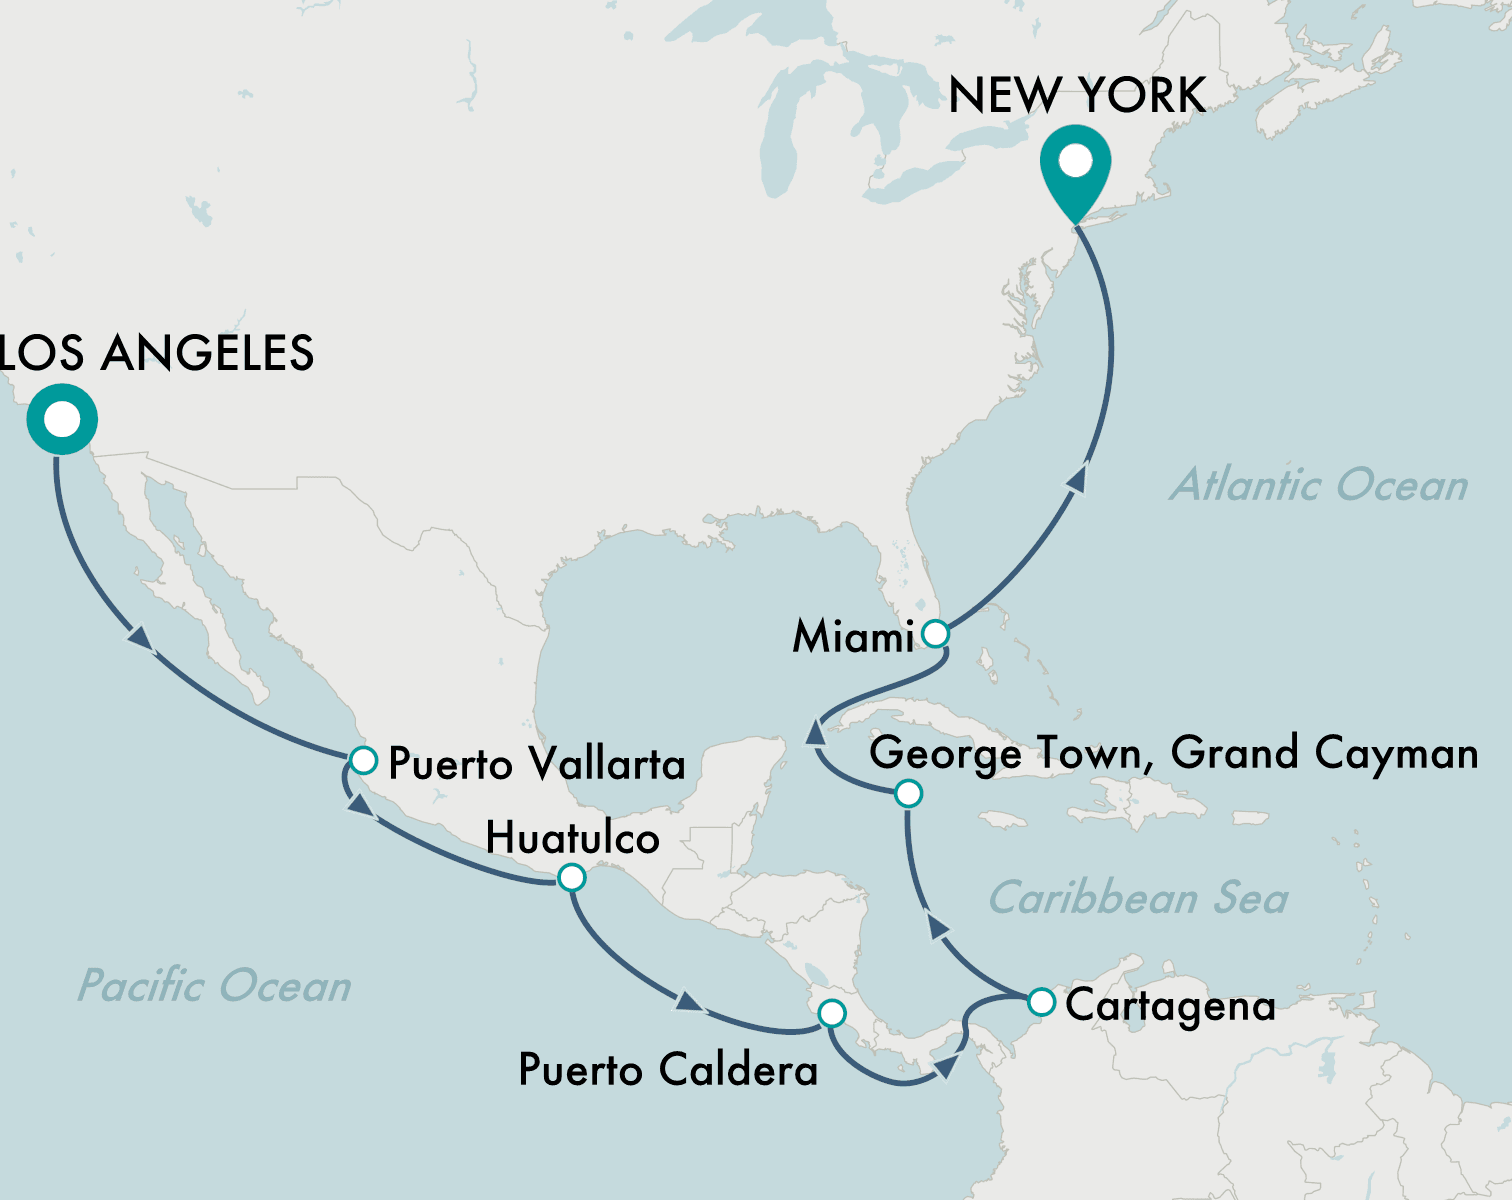 itinerary map of cruise Los Angeles to New York